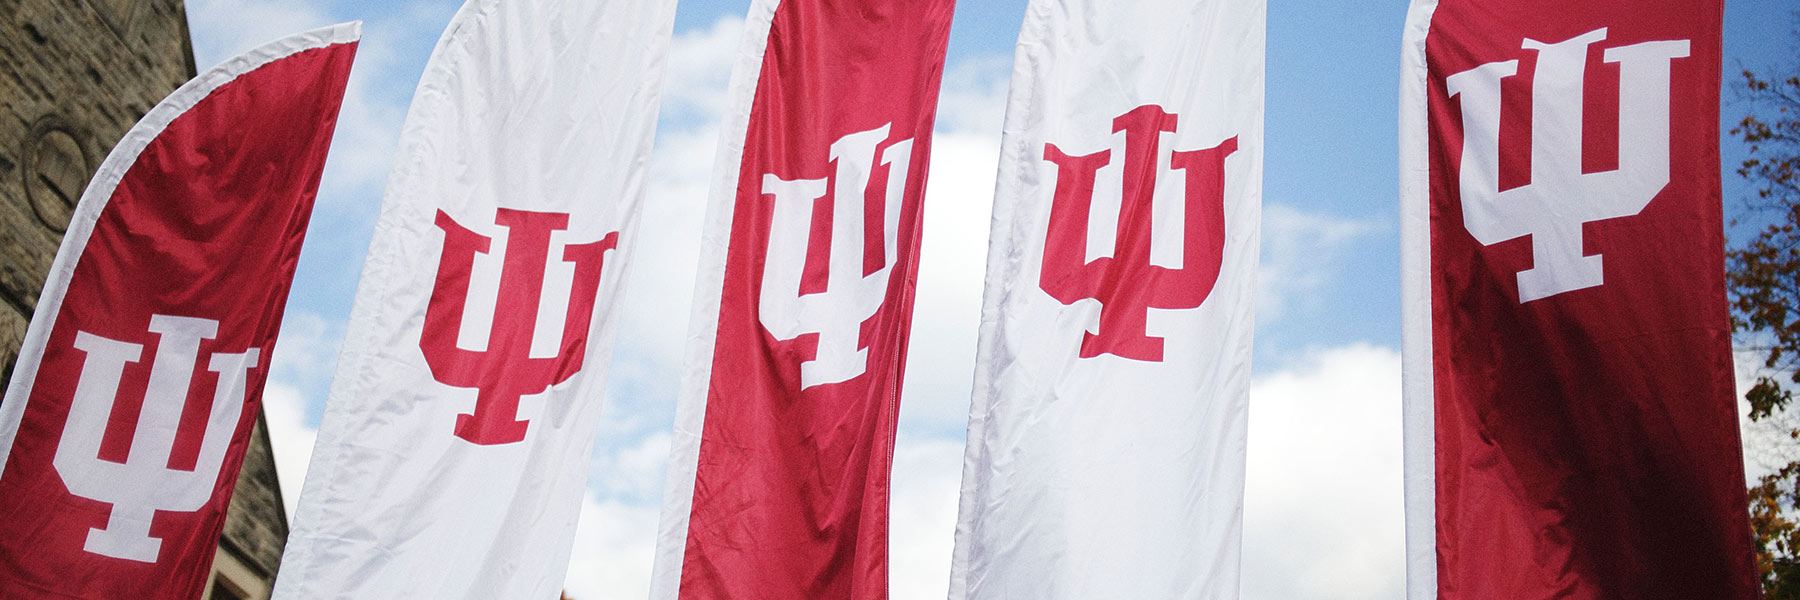 A row of red and white outdoor banners with the IU trident